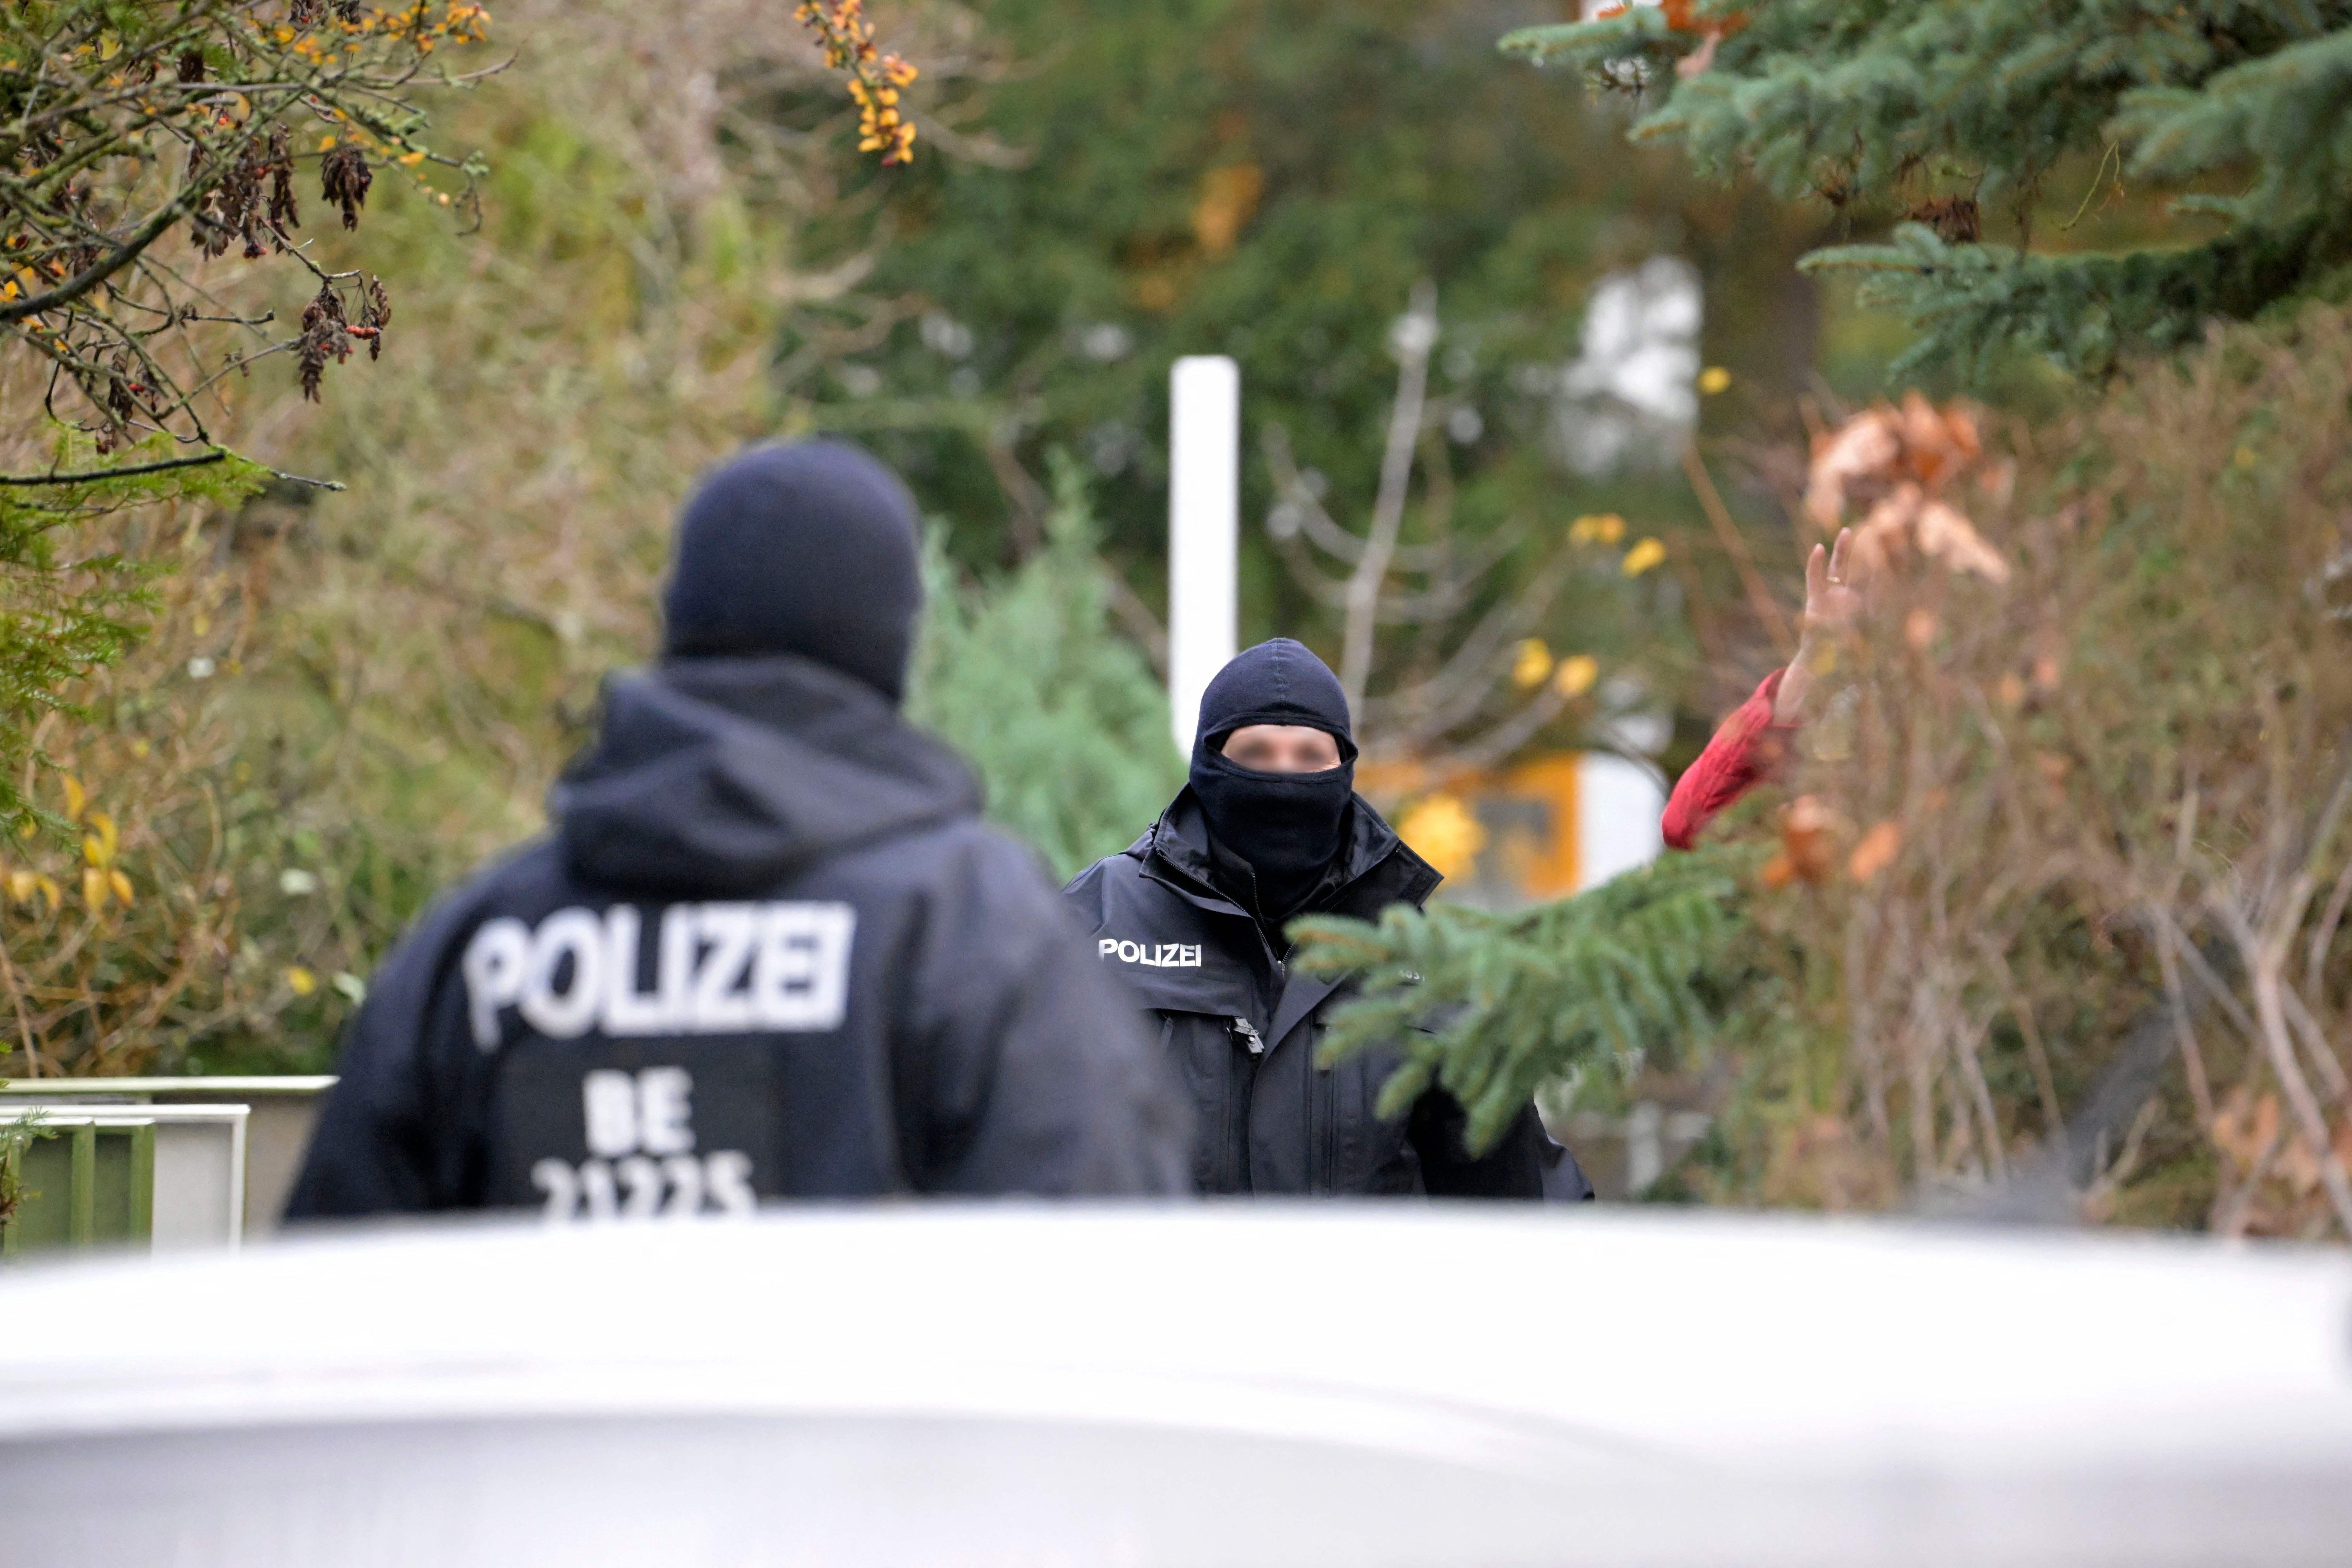 Police officers are seen during a raid on December 7, 2022 in Berlin that is part of nationwide early morning raids against members of a far-right "terror group" suspected of planning an attack. - During the nationwide raids, police arrested 25 people suspected of belonging to a far-right "terror cell" plotting to overthrow the government and attack parliament. Around 3,000 officers including elite anti-terror units took part in the early morning raids and searched more than 130 properties, in what German media described as one of the country's largest police actions ever against extremists. (Photo by Tobias SCHWARZ / AFP) (Photo by TOBIAS SCHWARZ/AFP via Getty Images)